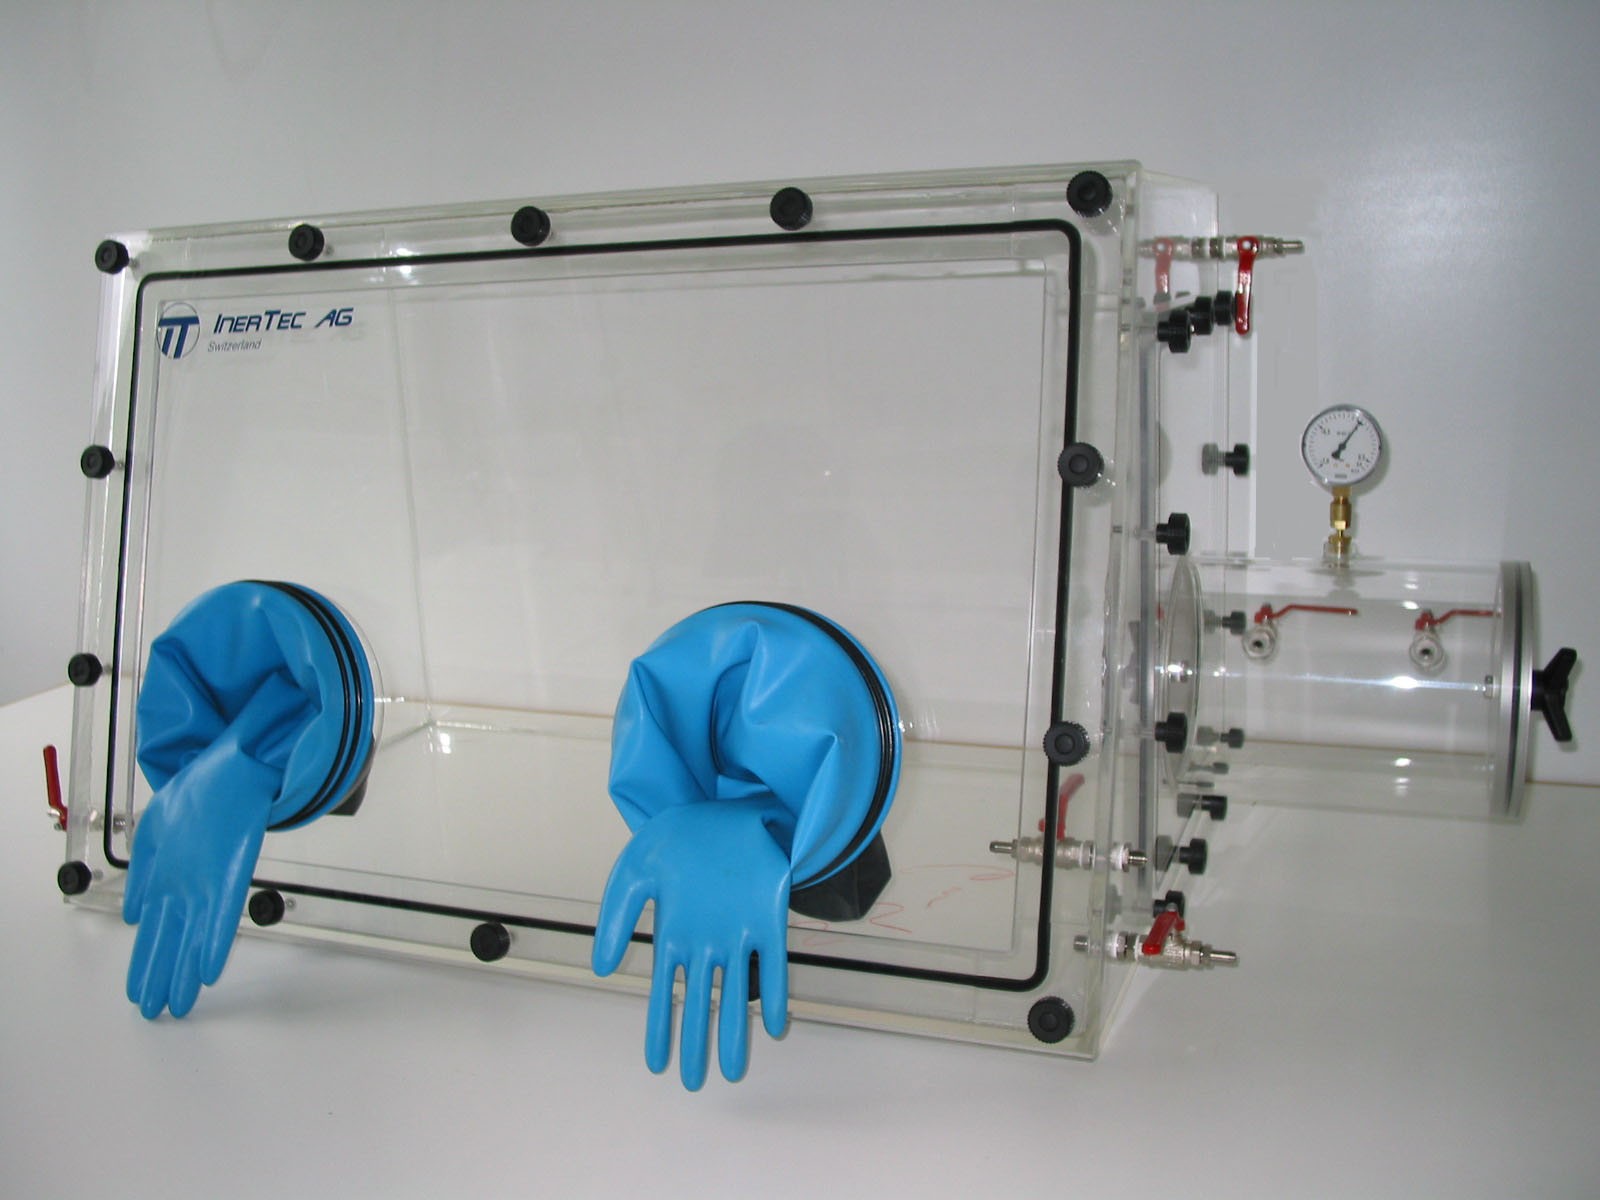 Glovebox made of acrylic &gt; Gas filling: automatic flushing with pressure control, front version: standard, side version: hinged doors, control: oxygen regulator